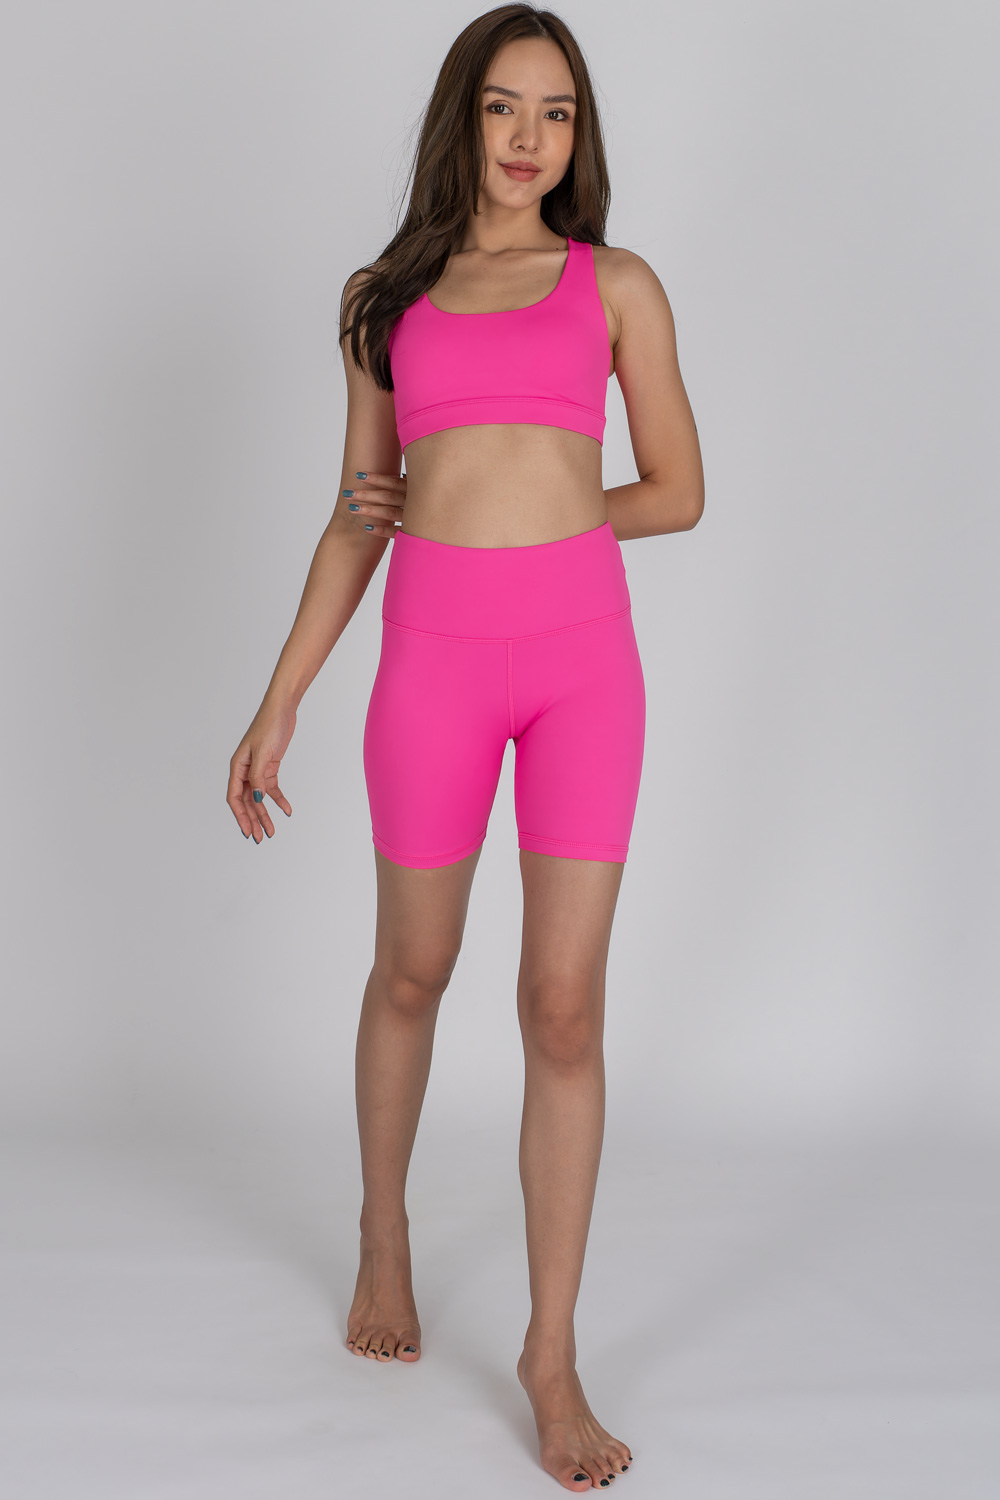 Shorts Los Angeles Pink Xóia! Fitness